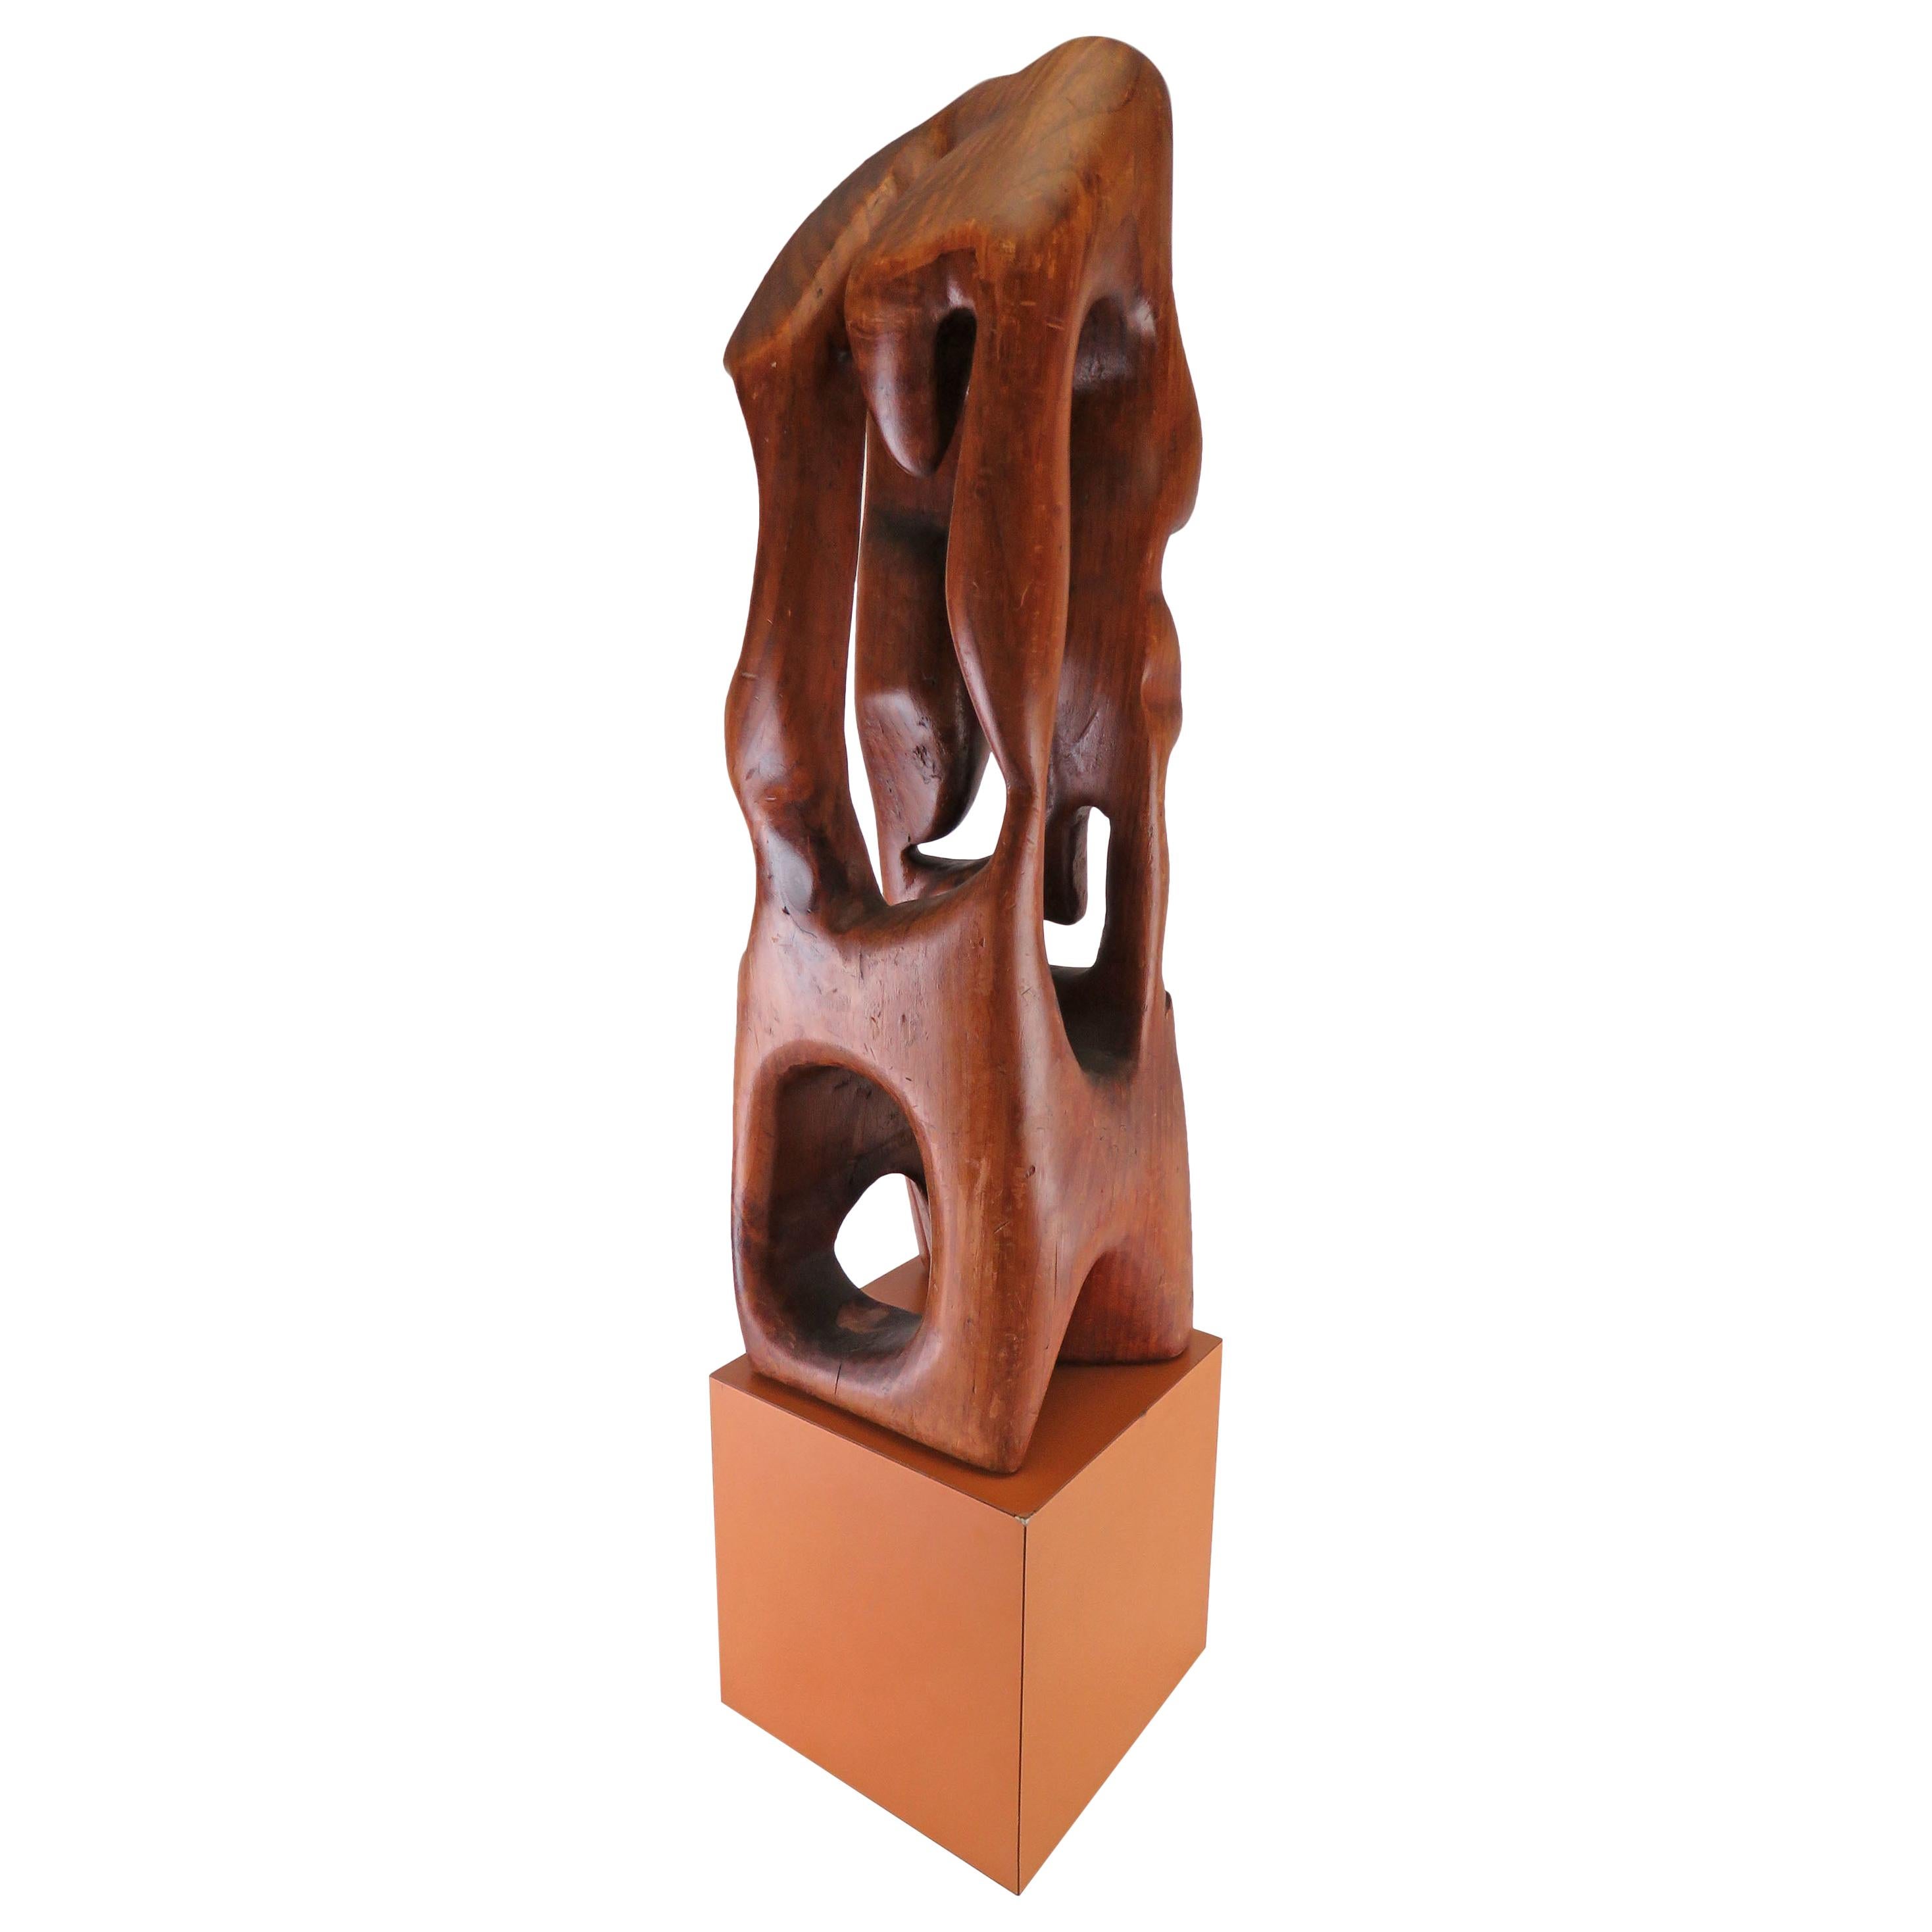 Abstract Modernist Carved Wood Sculpture, circa 1960s